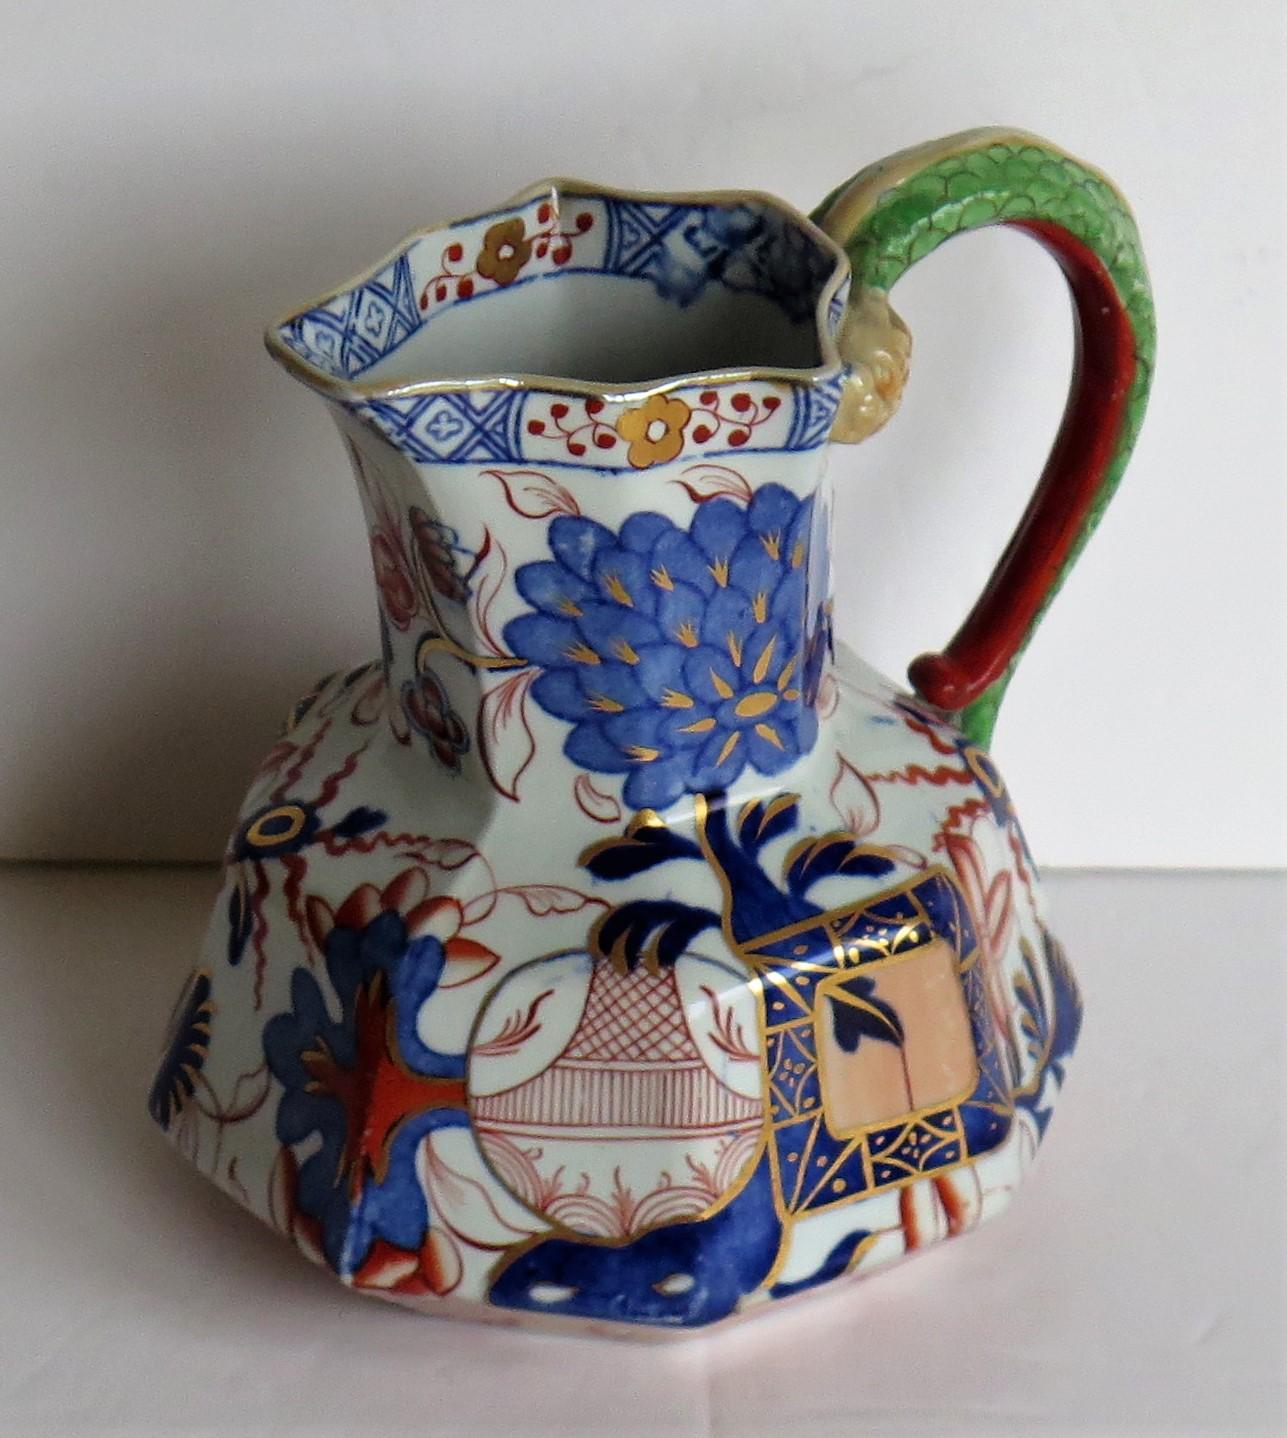 This is a very good Hydra jug or Pitcher made by the Davenport Company of Longport, Staffordshire, England in the late Georgian period, circa 1805-1820, made of Ironstone pottery, which Davenport called Stone China, early 19th century.

It is very